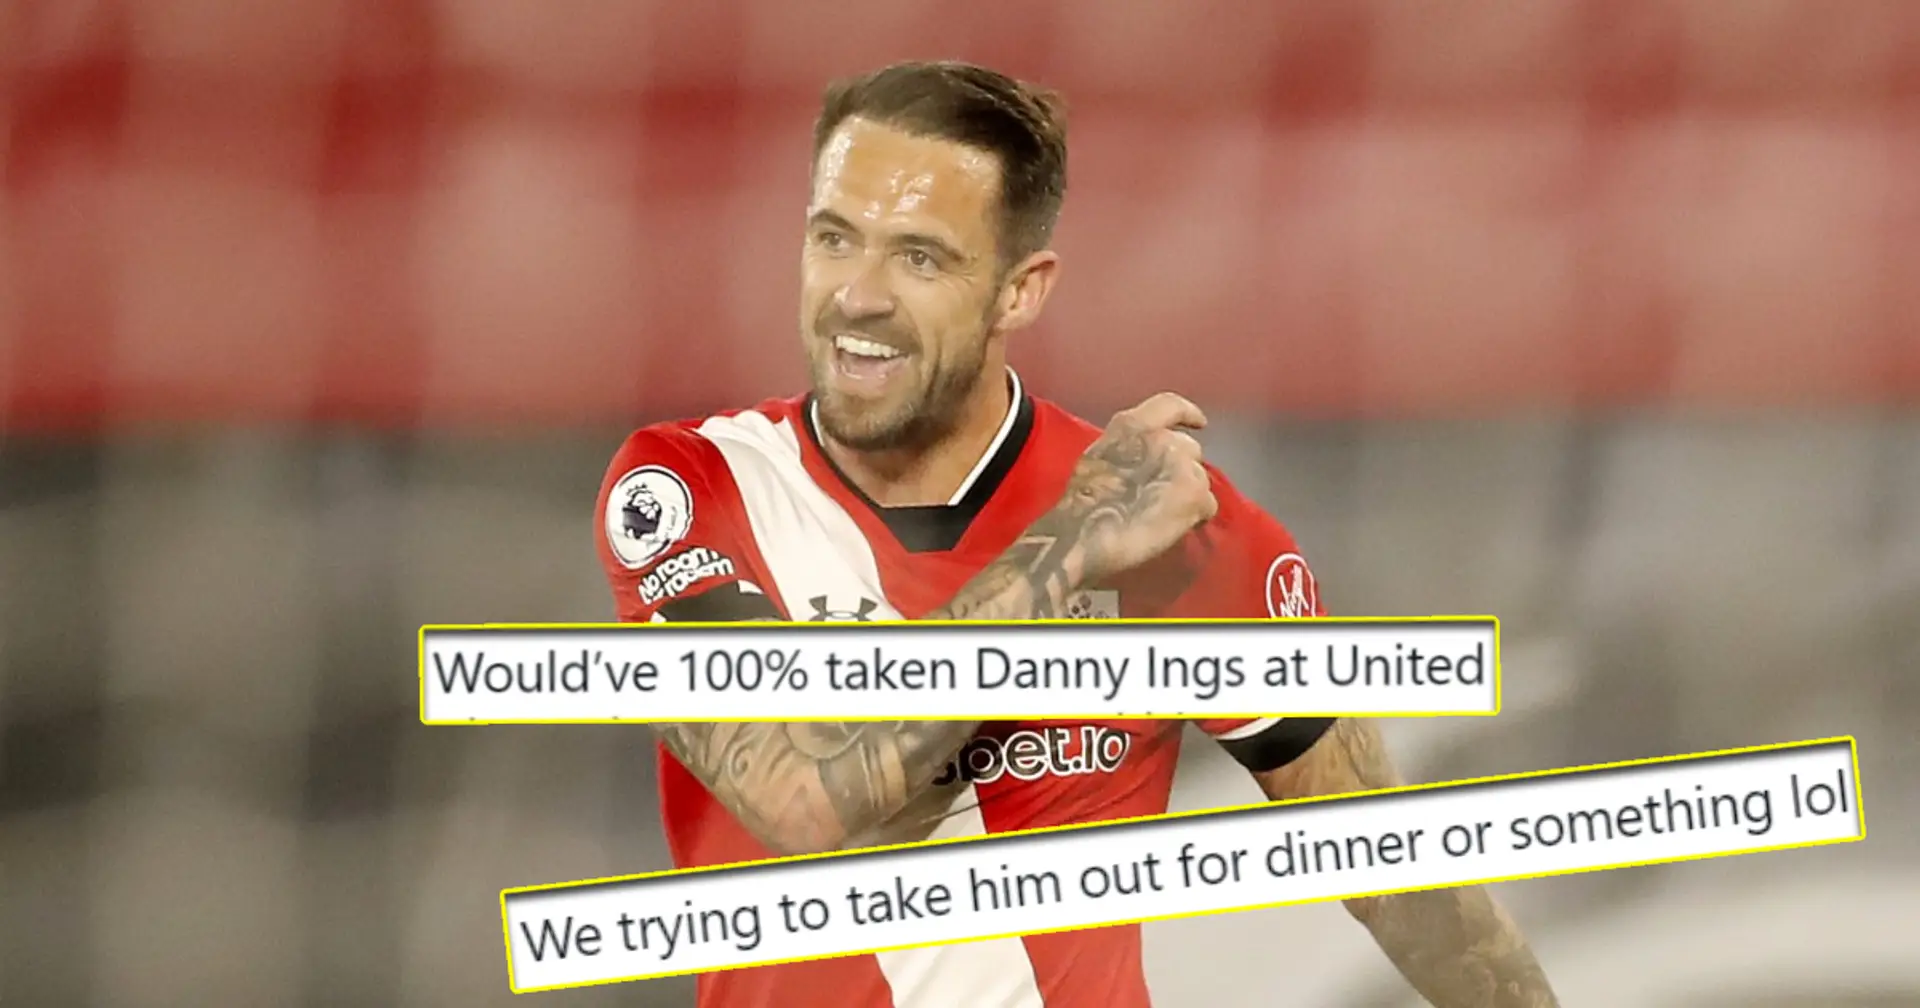 'Could be good option' vs 'we don't need him': United fans react as Danny Ings rejects Southampton contract